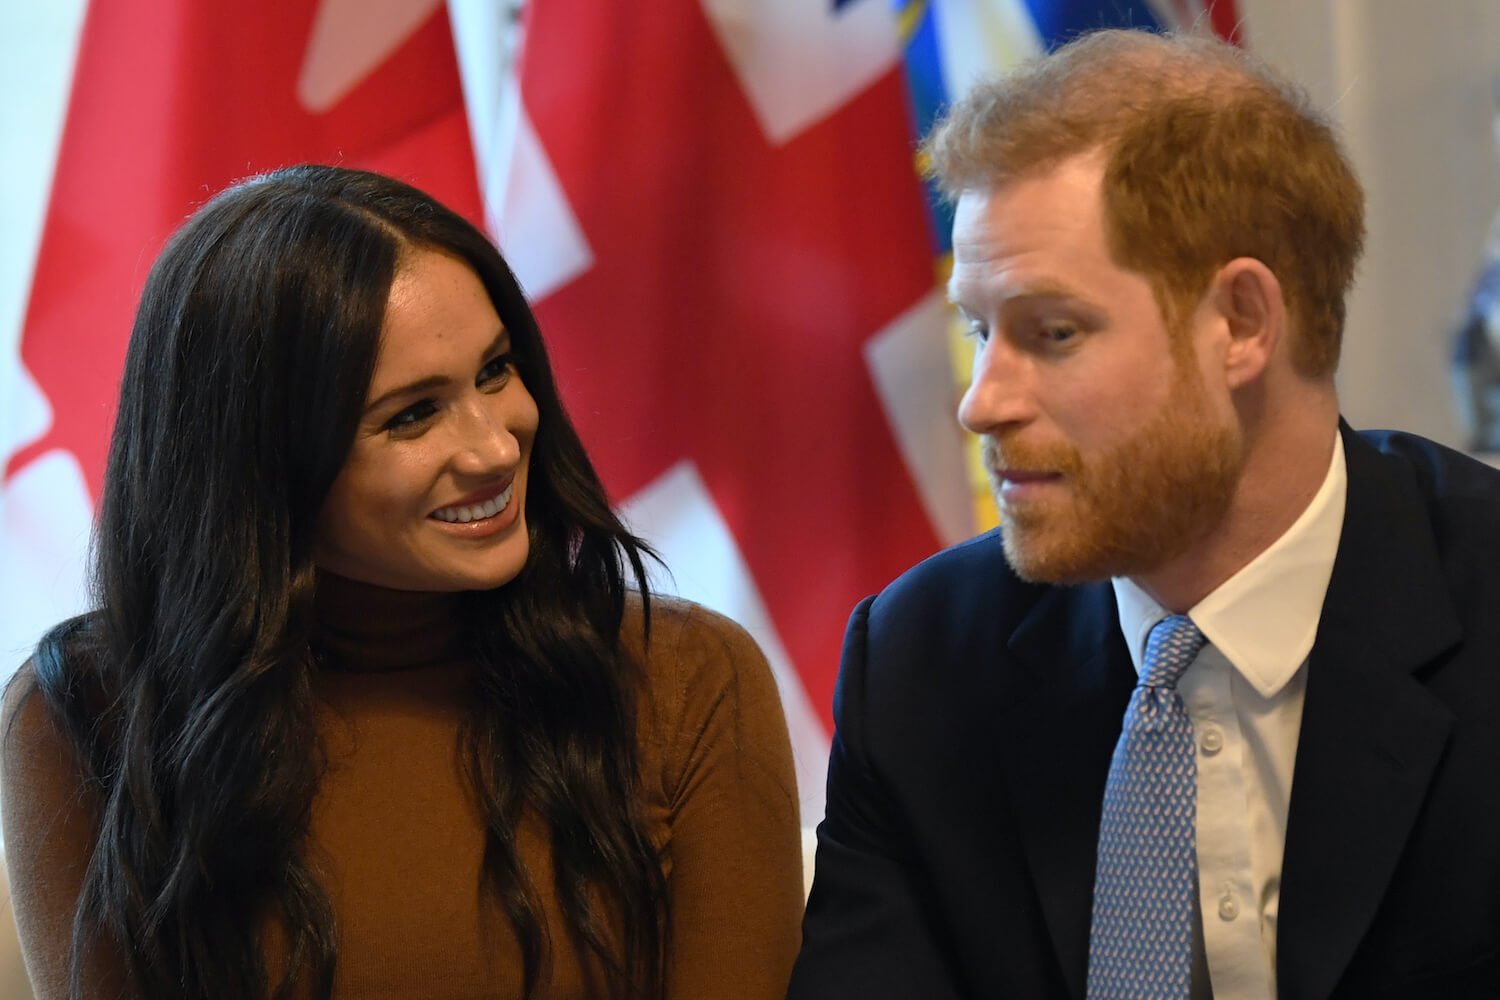 Meghan Markle wears a brown top as she looks at Prince Harry and smiles while he looks on